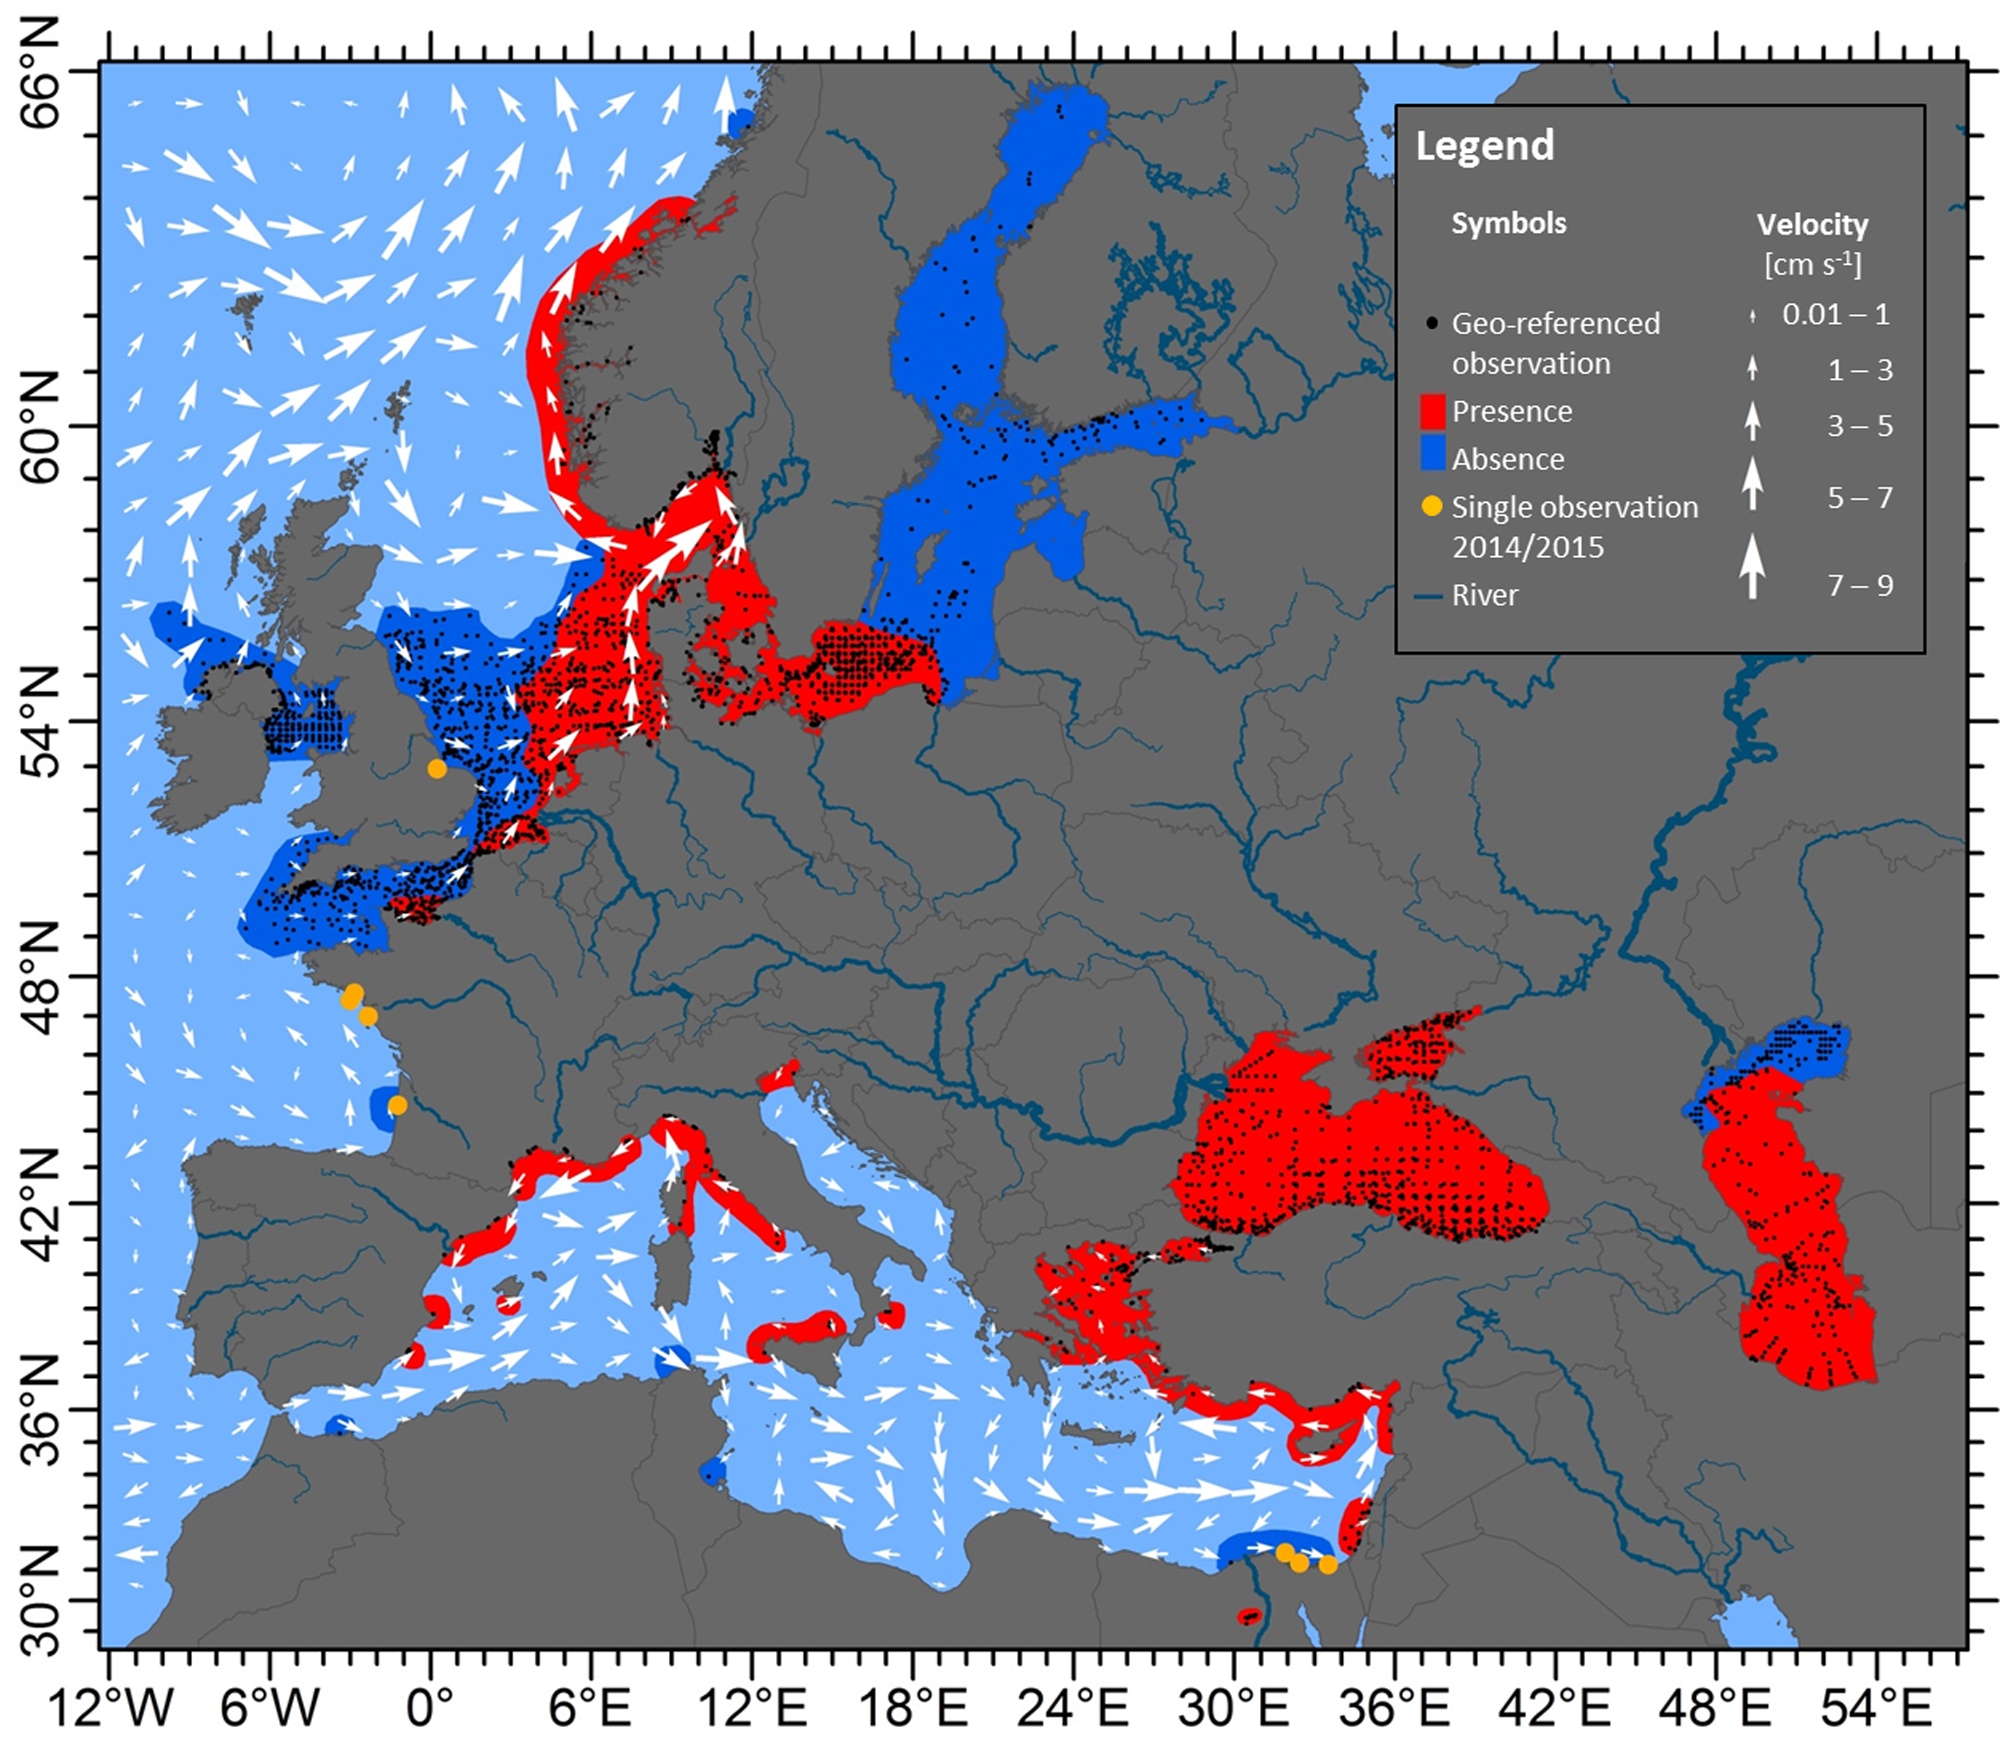 Distribution of Mnemiopsis leidyi in Western Eurasian waters for the period from 1990 to November 2016 based on 12,400 geo-referenced observations (black dots), with the areas presence (red) and absence (dark blue) marked.
(c) Cornelia Jaspers / GEOMAR, DTU Aqua